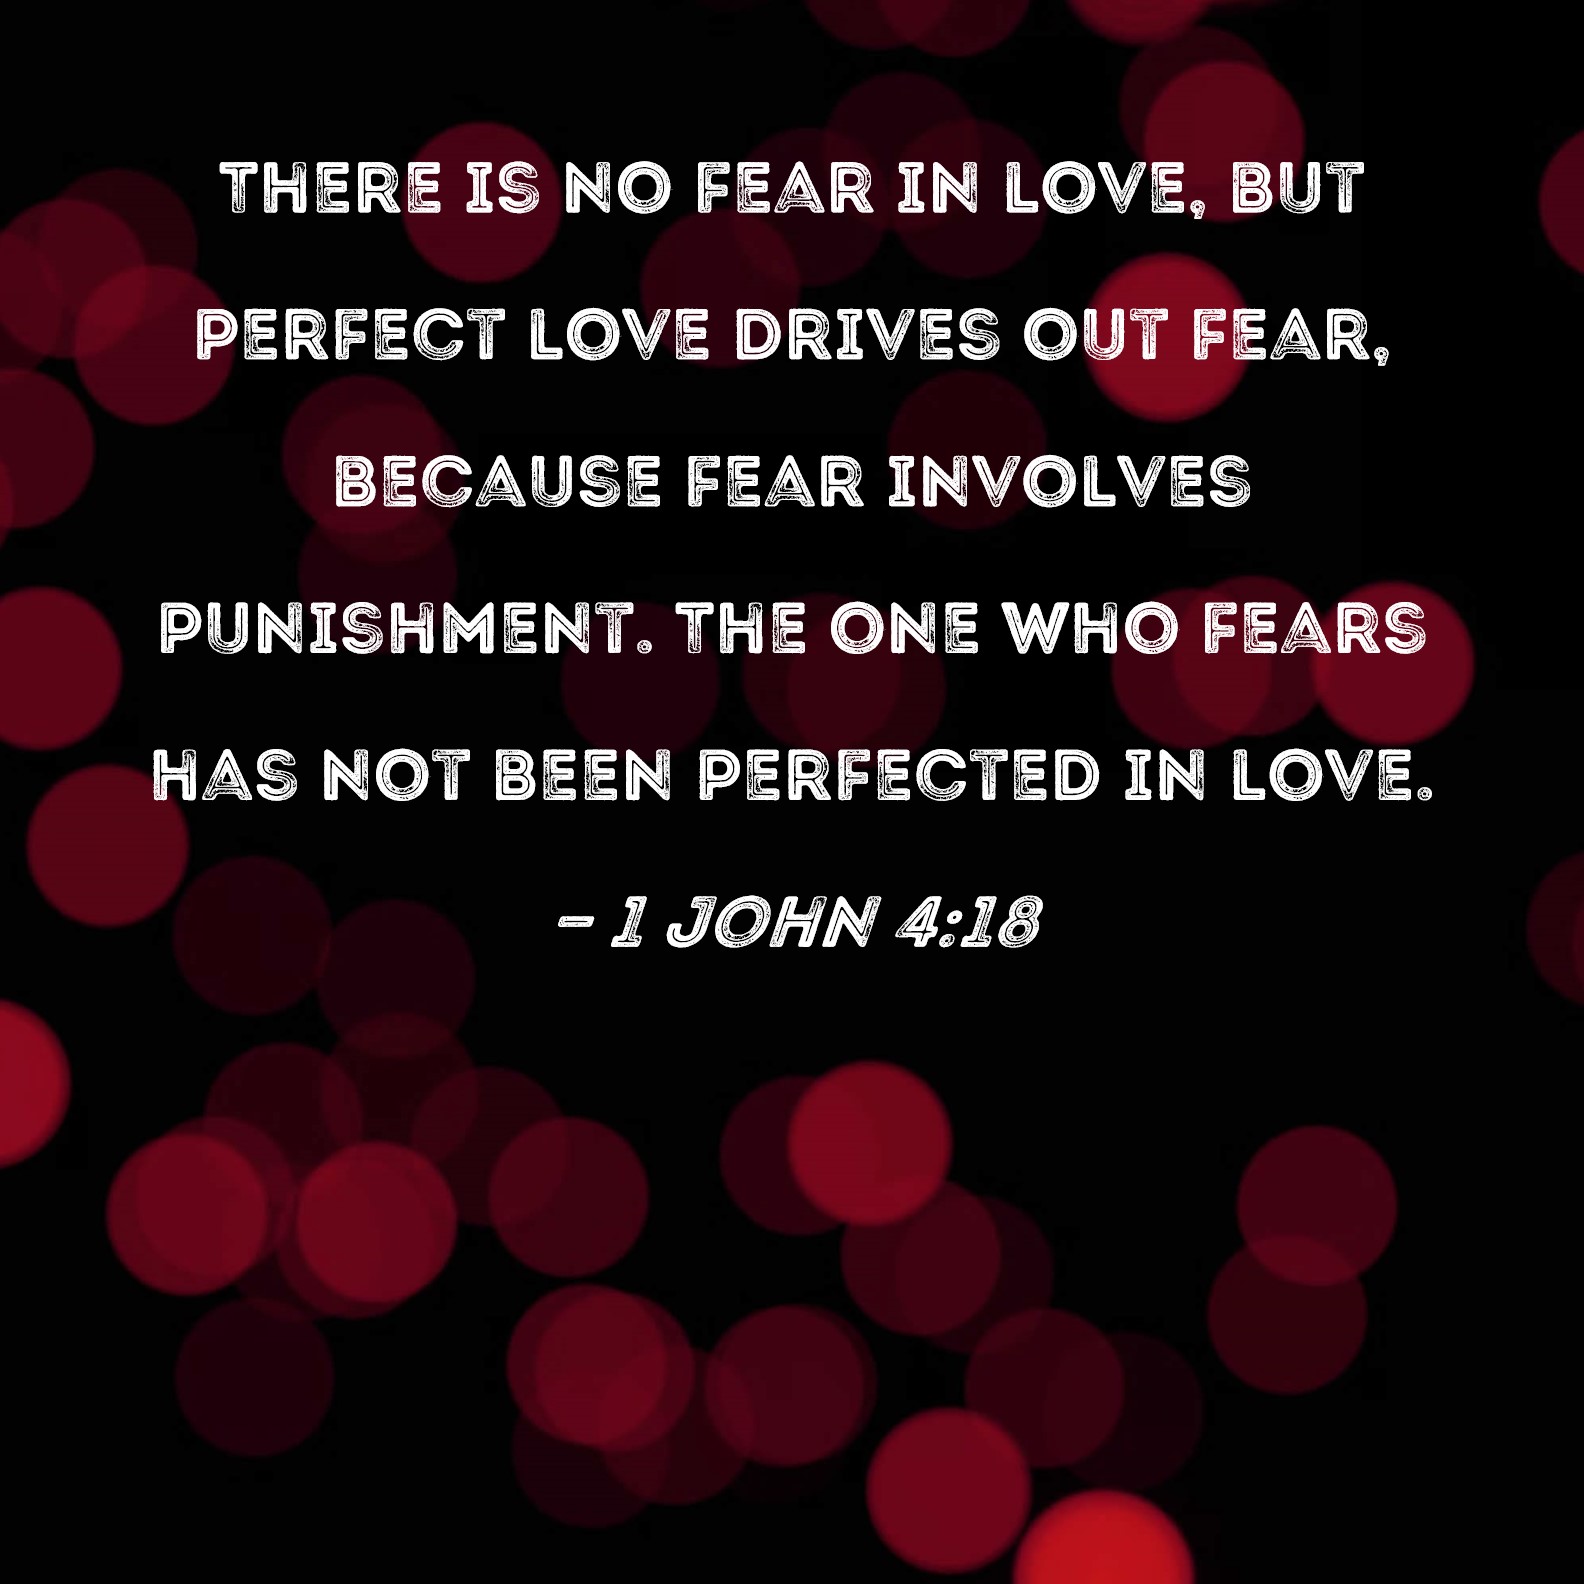 1 John 4:18 There is no fear in love, but perfect love drives out